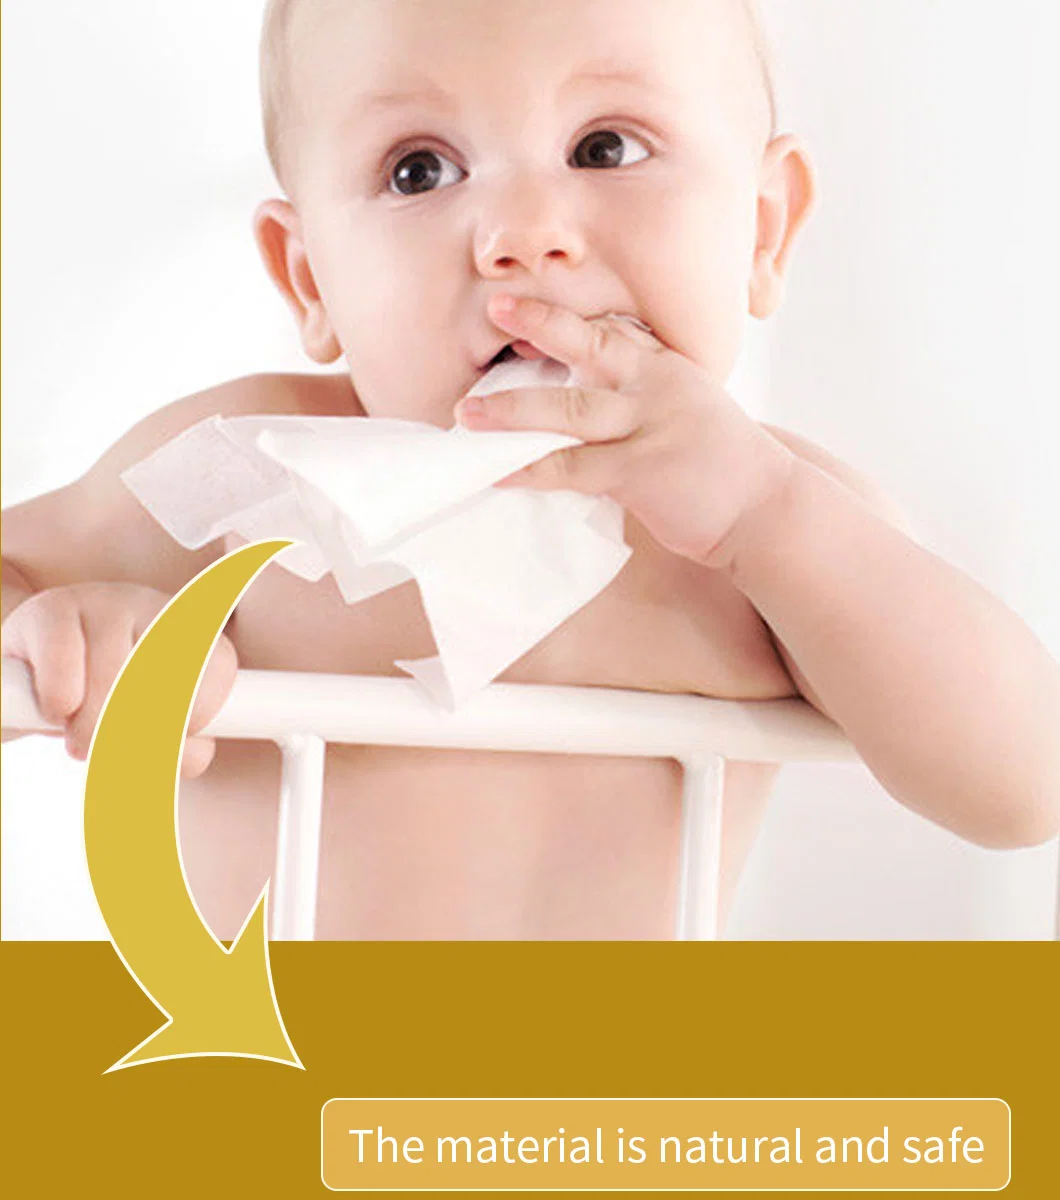 Baby Use Bamboo Facial Paper/Towel, Super Safe Biodegradable Bath Tissue/Towel